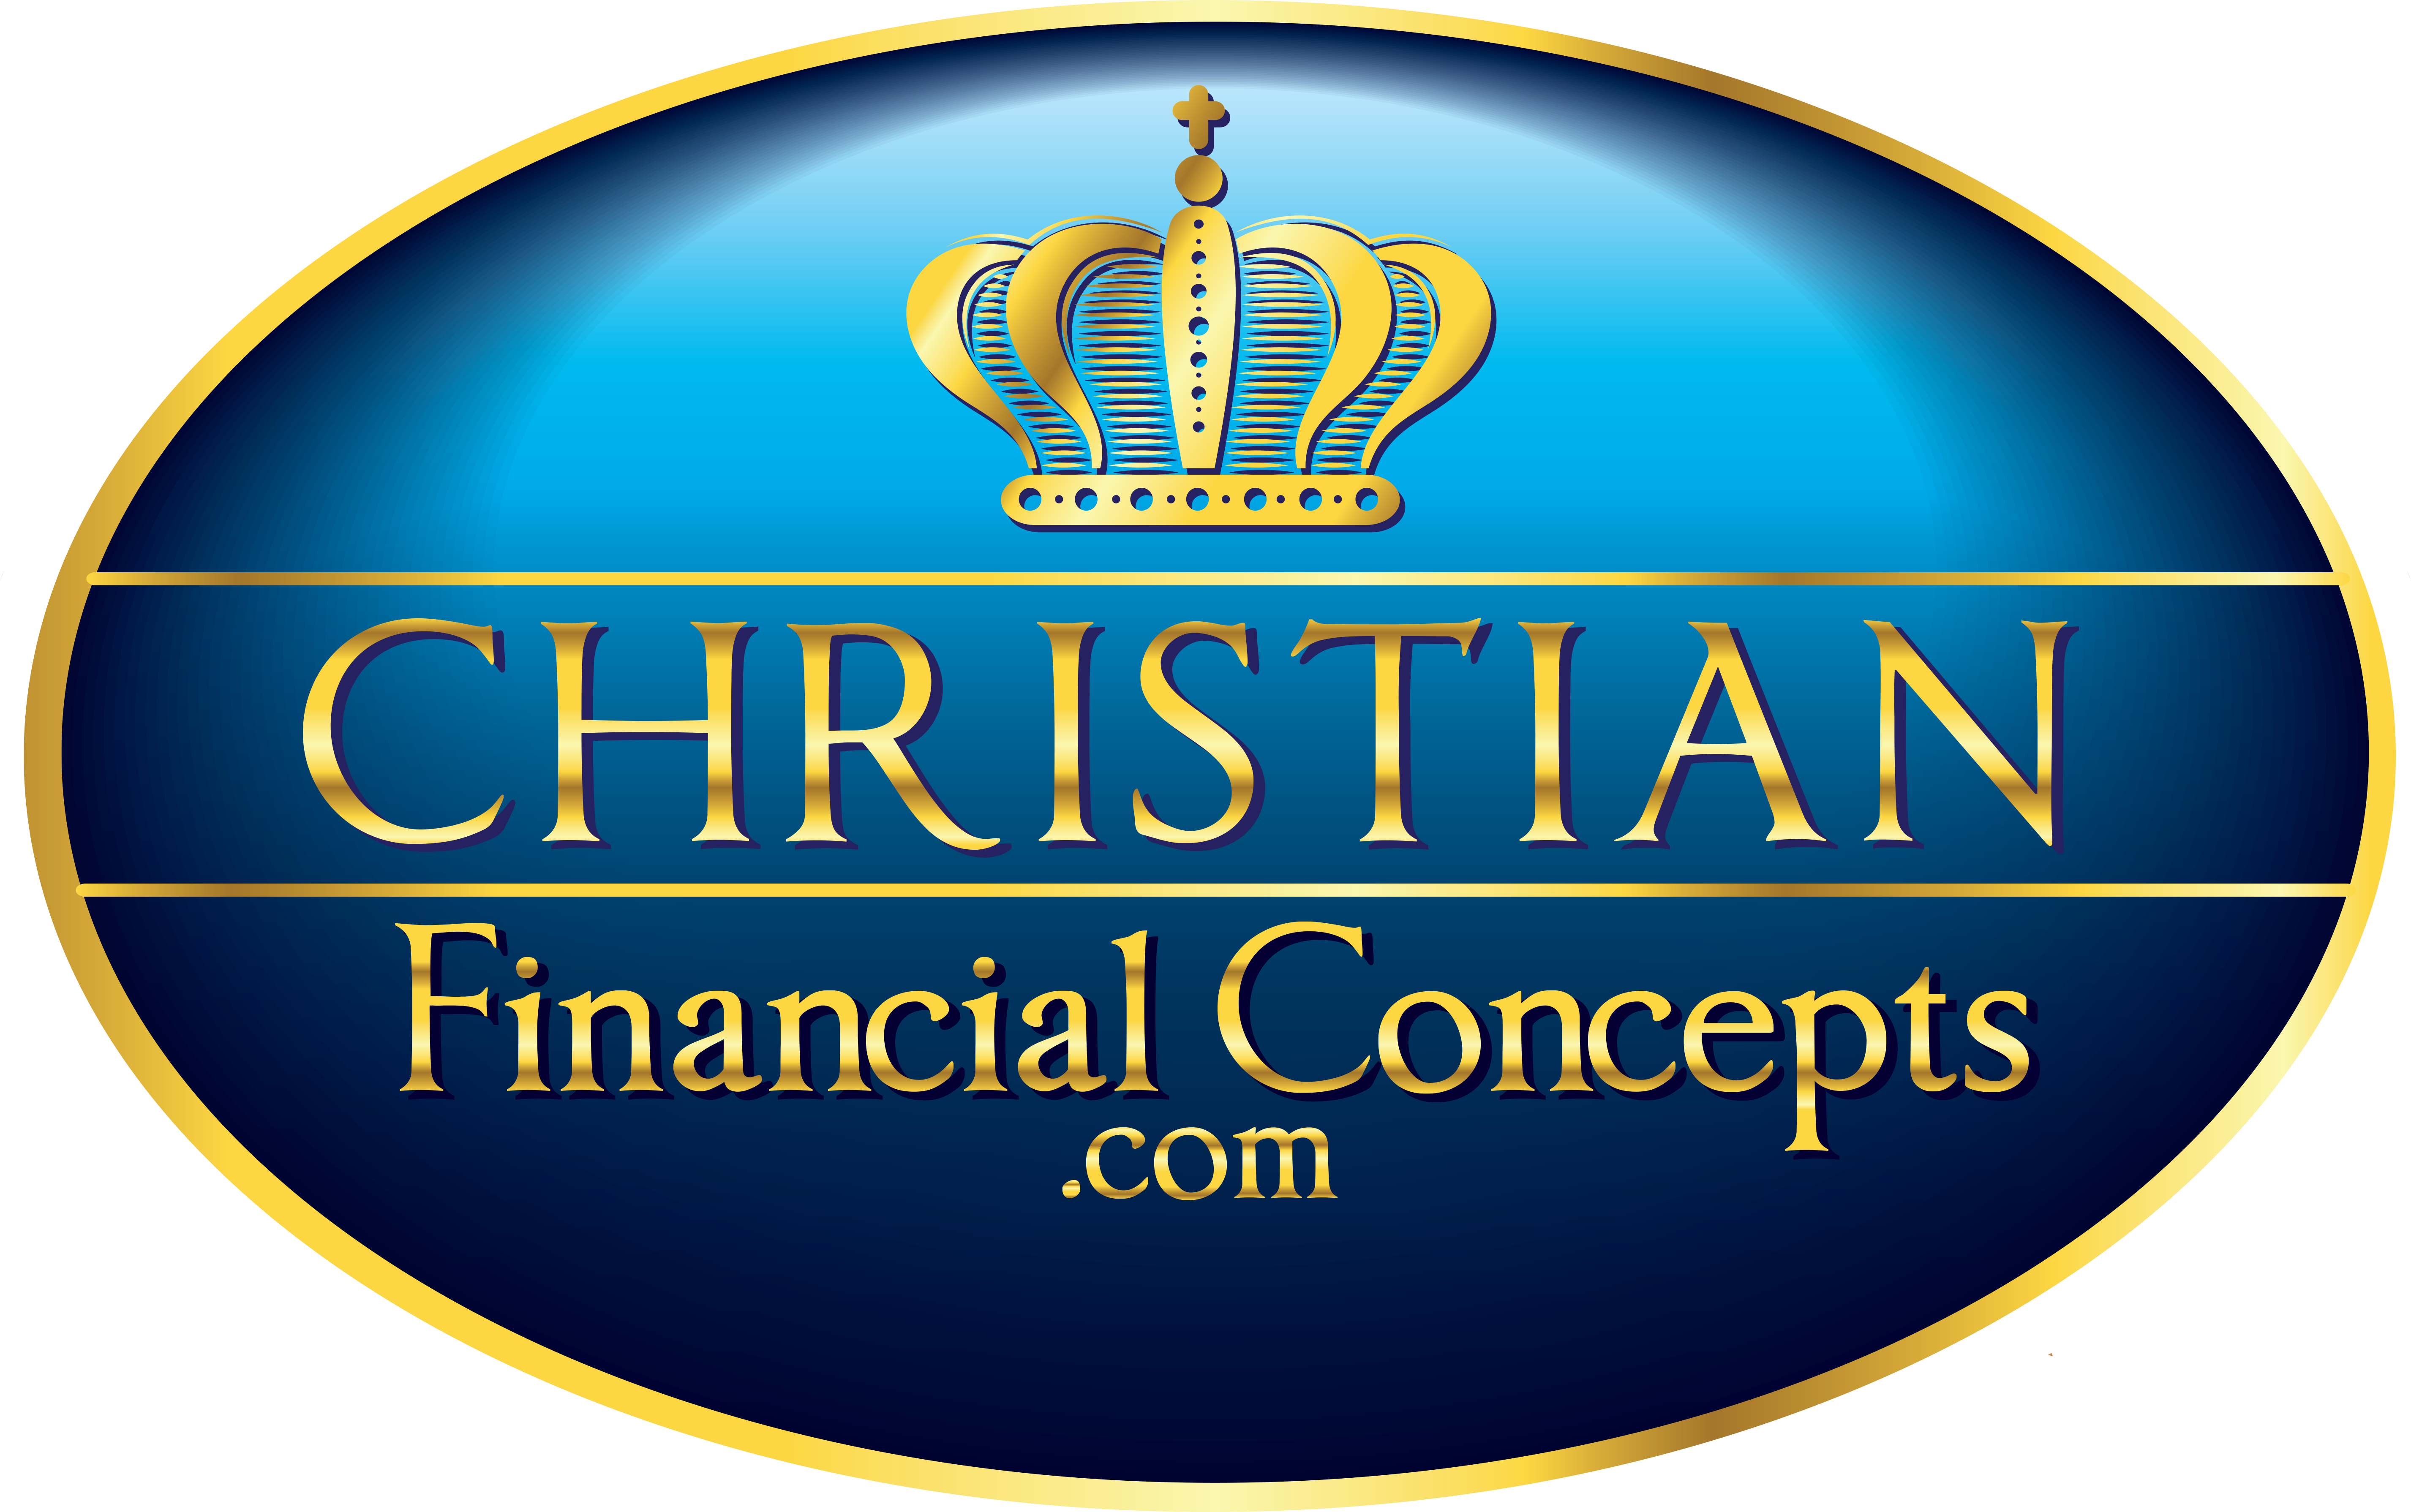 Christian Financial Concepts